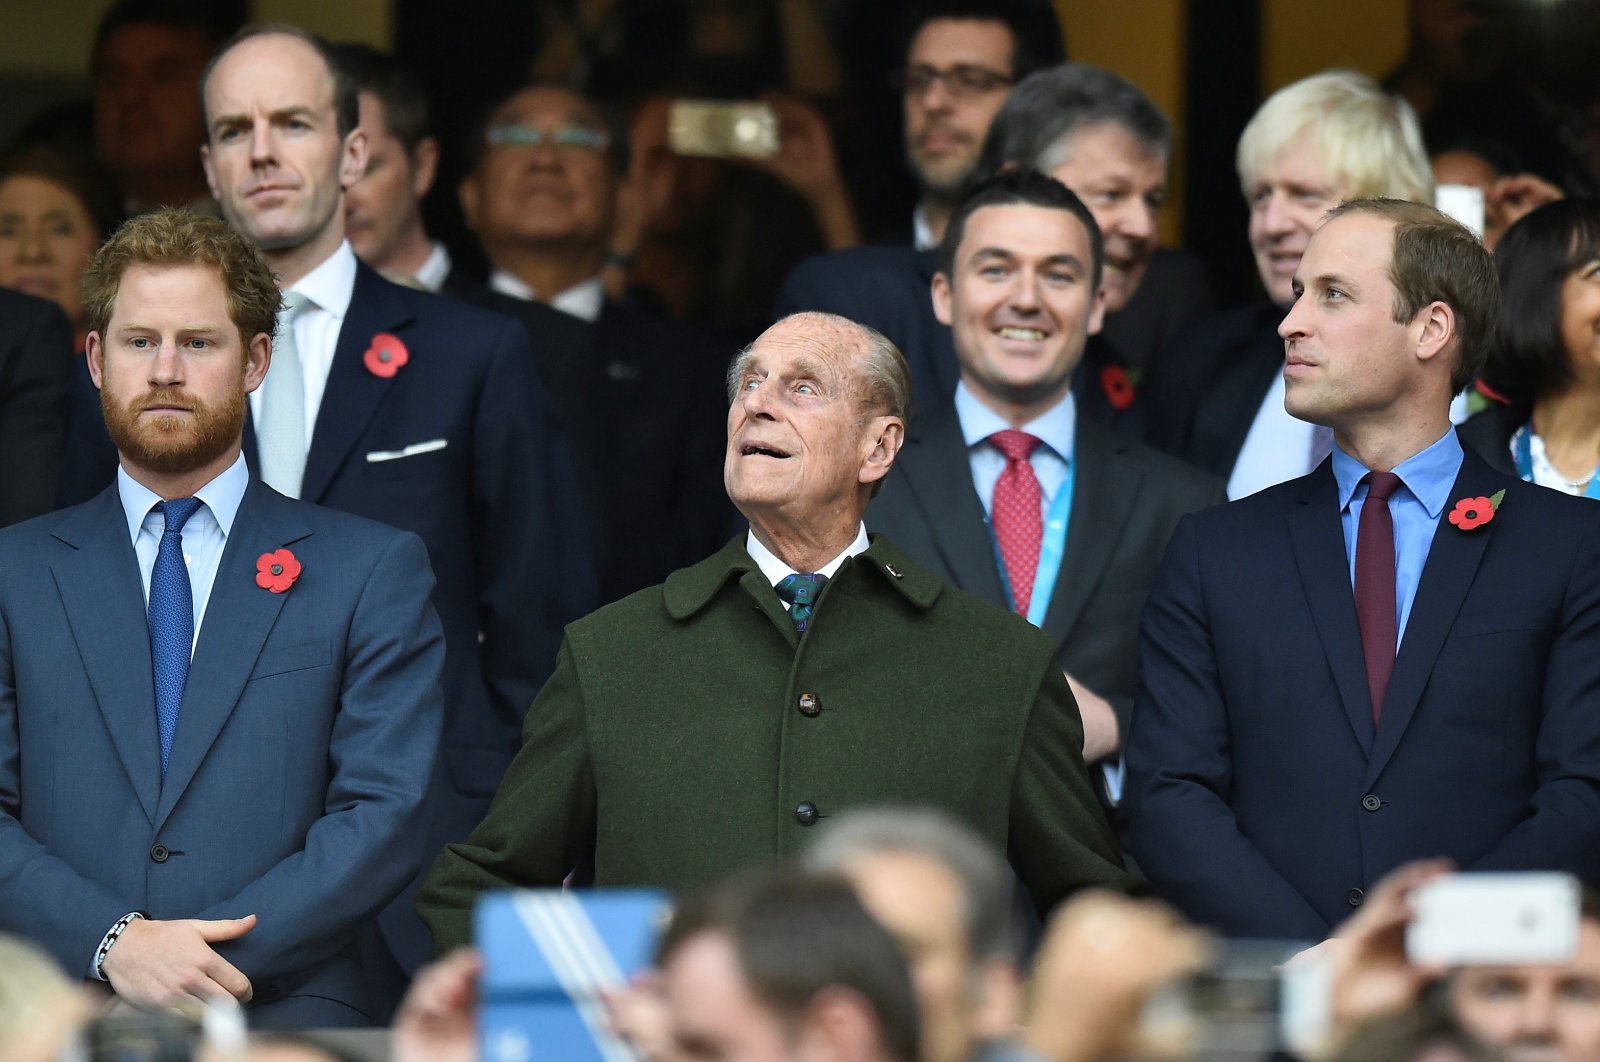 Britain's Prince Harry (L), Prince Philip (C) and Prince William attend the Rugby World Cup final match between New Zealand against Australia at Twickenham in London, U.K, Oct. 31, 2015. (Reuters Photo)